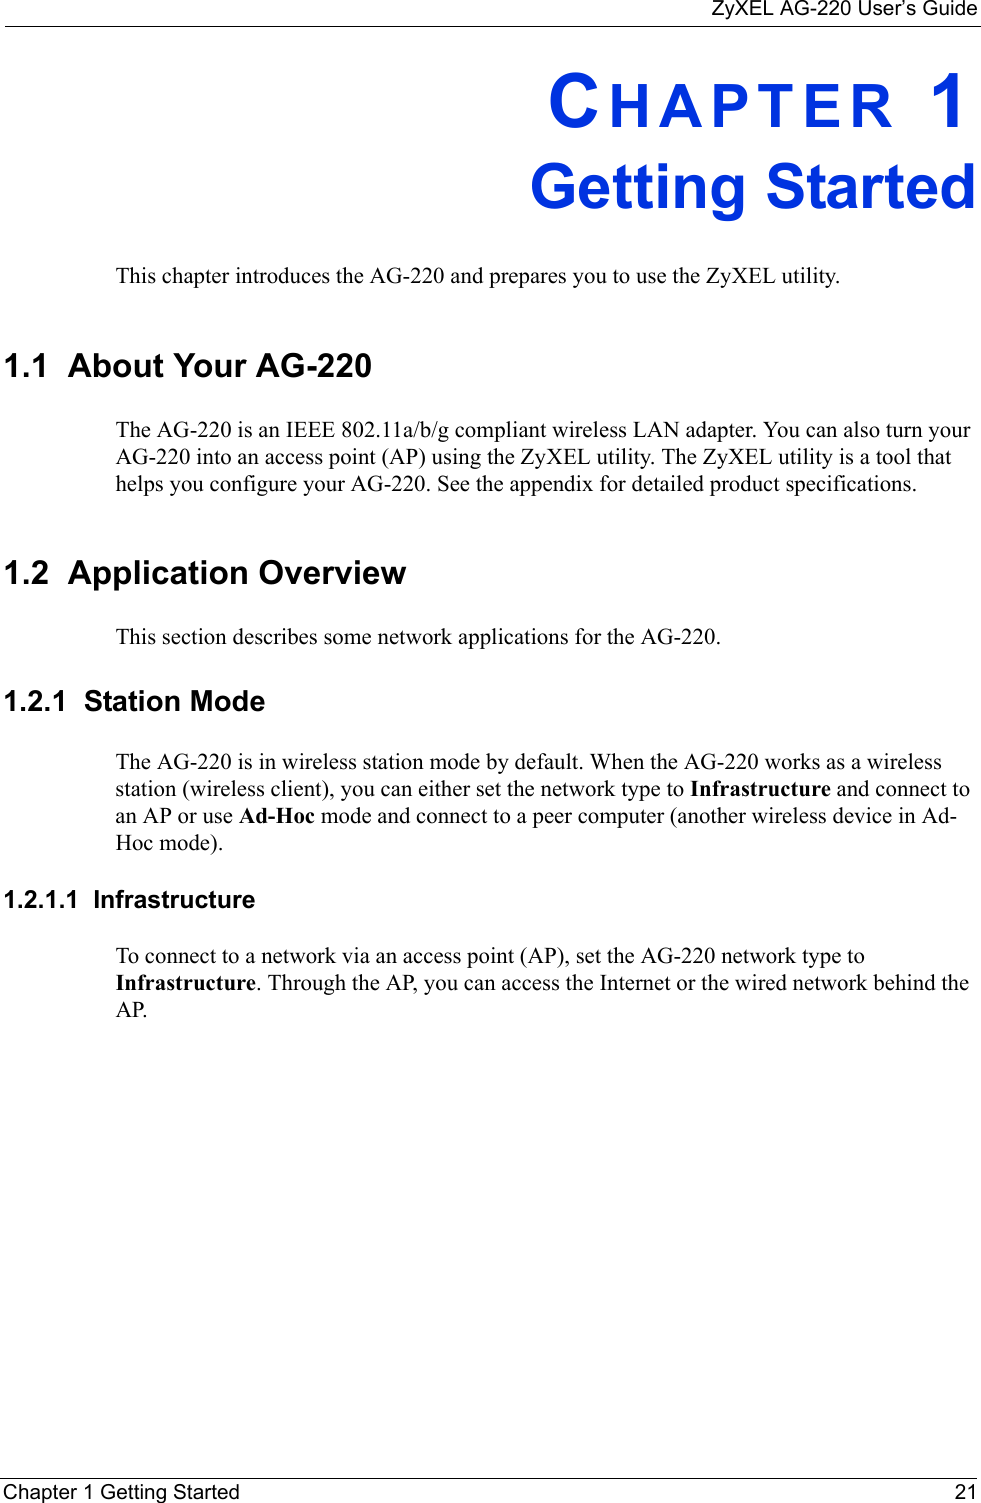 ZyXEL AG-220 User’s GuideChapter 1 Getting Started 21CHAPTER 1Getting StartedThis chapter introduces the AG-220 and prepares you to use the ZyXEL utility.1.1  About Your AG-220    The AG-220 is an IEEE 802.11a/b/g compliant wireless LAN adapter. You can also turn your AG-220 into an access point (AP) using the ZyXEL utility. The ZyXEL utility is a tool that helps you configure your AG-220. See the appendix for detailed product specifications.1.2  Application OverviewThis section describes some network applications for the AG-220. 1.2.1  Station ModeThe AG-220 is in wireless station mode by default. When the AG-220 works as a wireless station (wireless client), you can either set the network type to Infrastructure and connect to an AP or use Ad-Hoc mode and connect to a peer computer (another wireless device in Ad-Hoc mode).1.2.1.1  Infrastructure To connect to a network via an access point (AP), set the AG-220 network type to Infrastructure. Through the AP, you can access the Internet or the wired network behind the AP.  